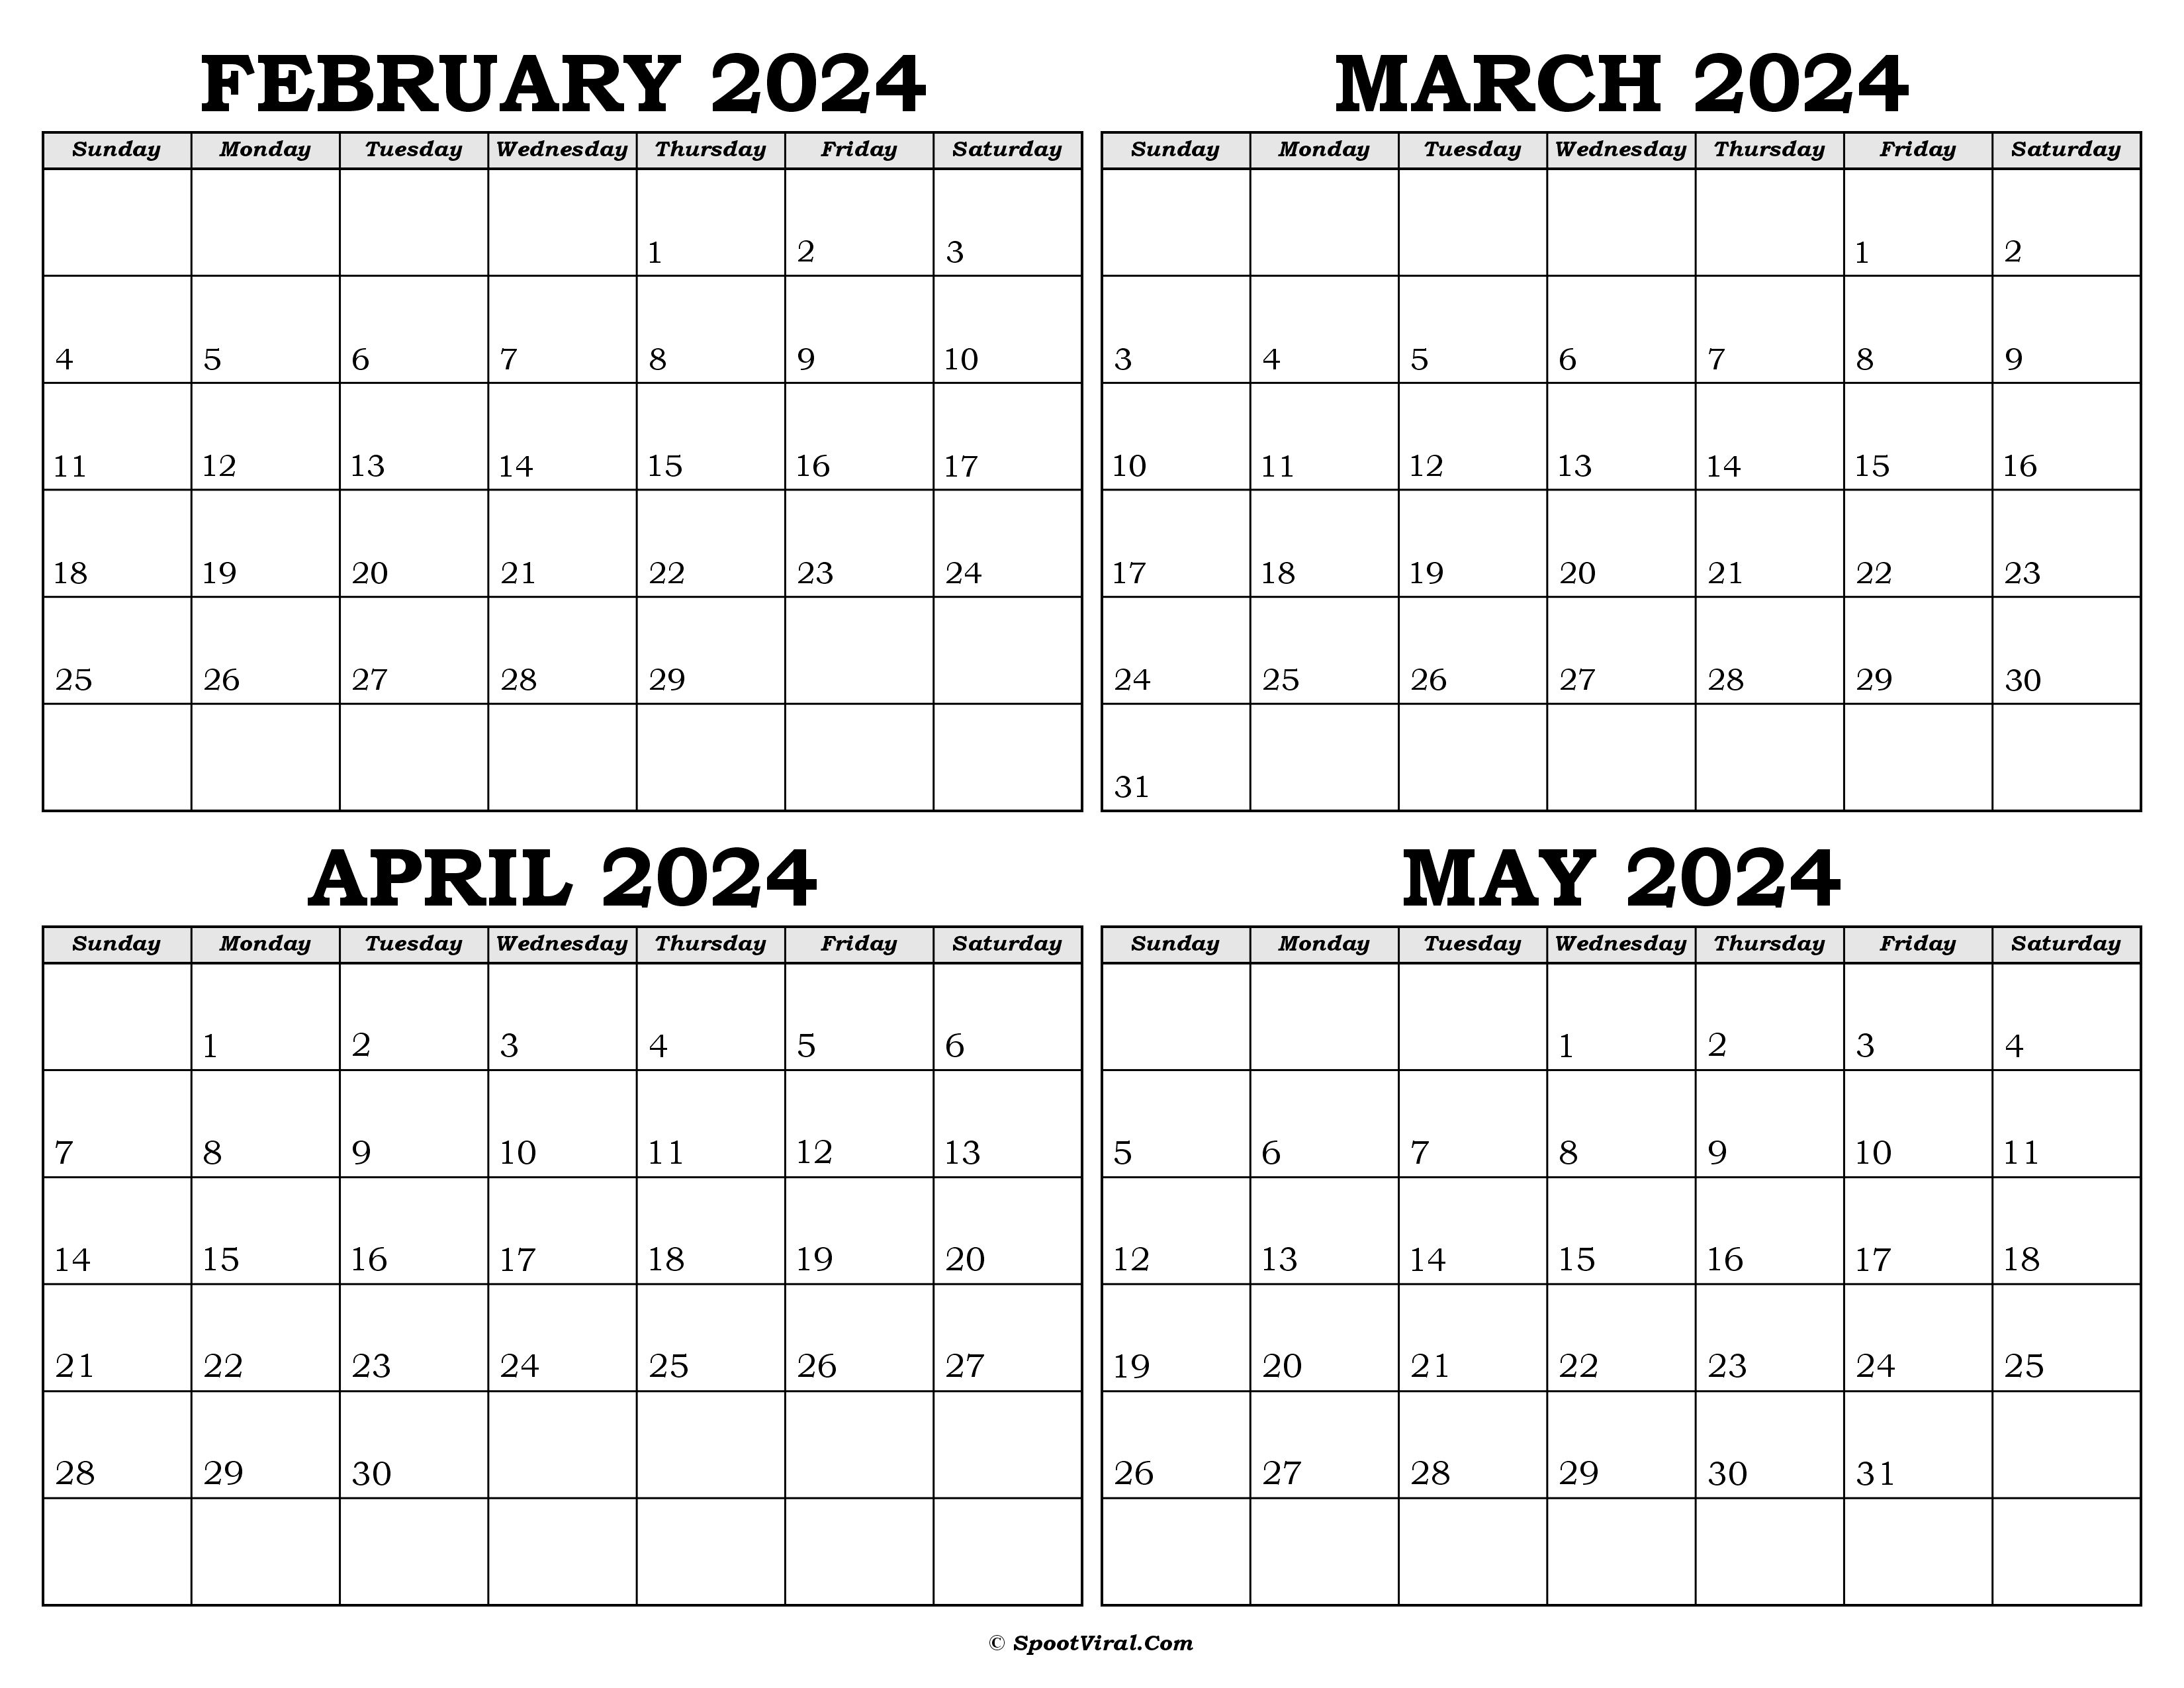 Calendar February to May 2024